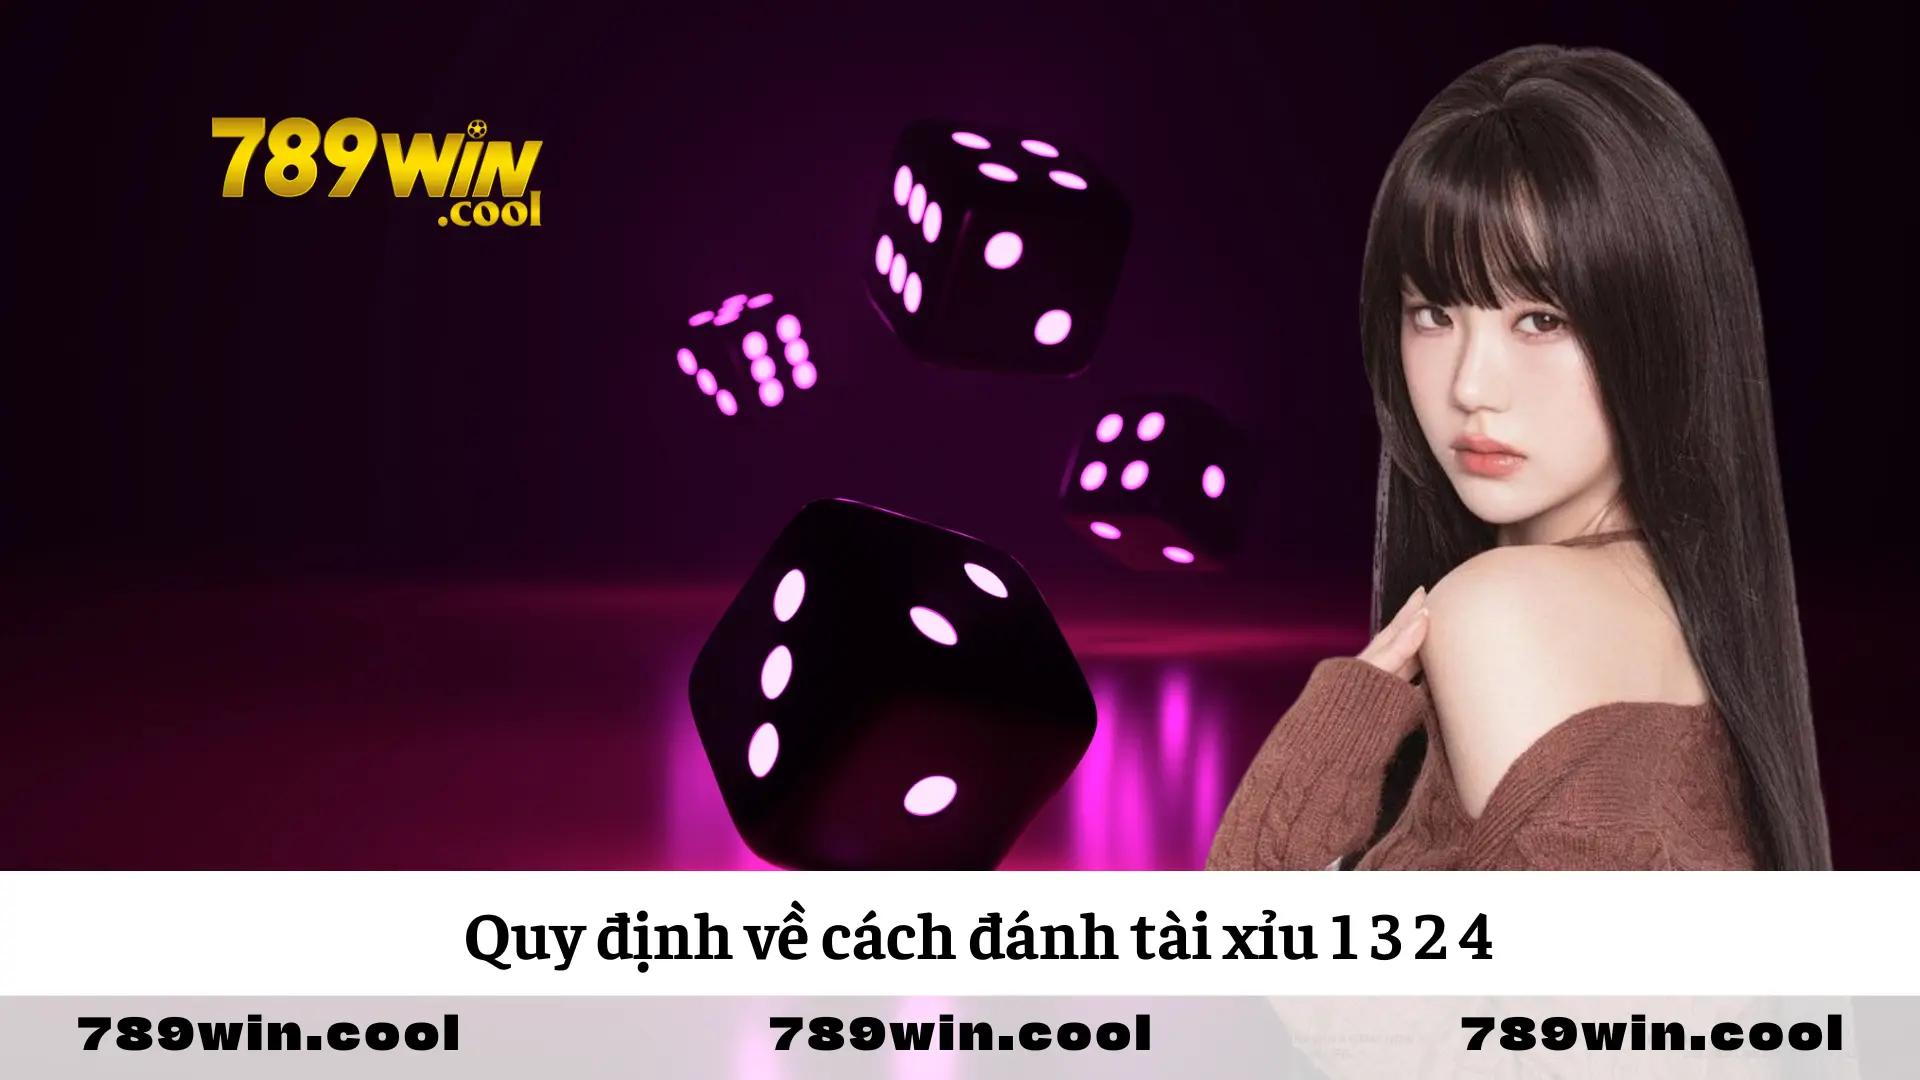 quy-dinh-ve-cach-danh-tai-xiu-1-3-2-4